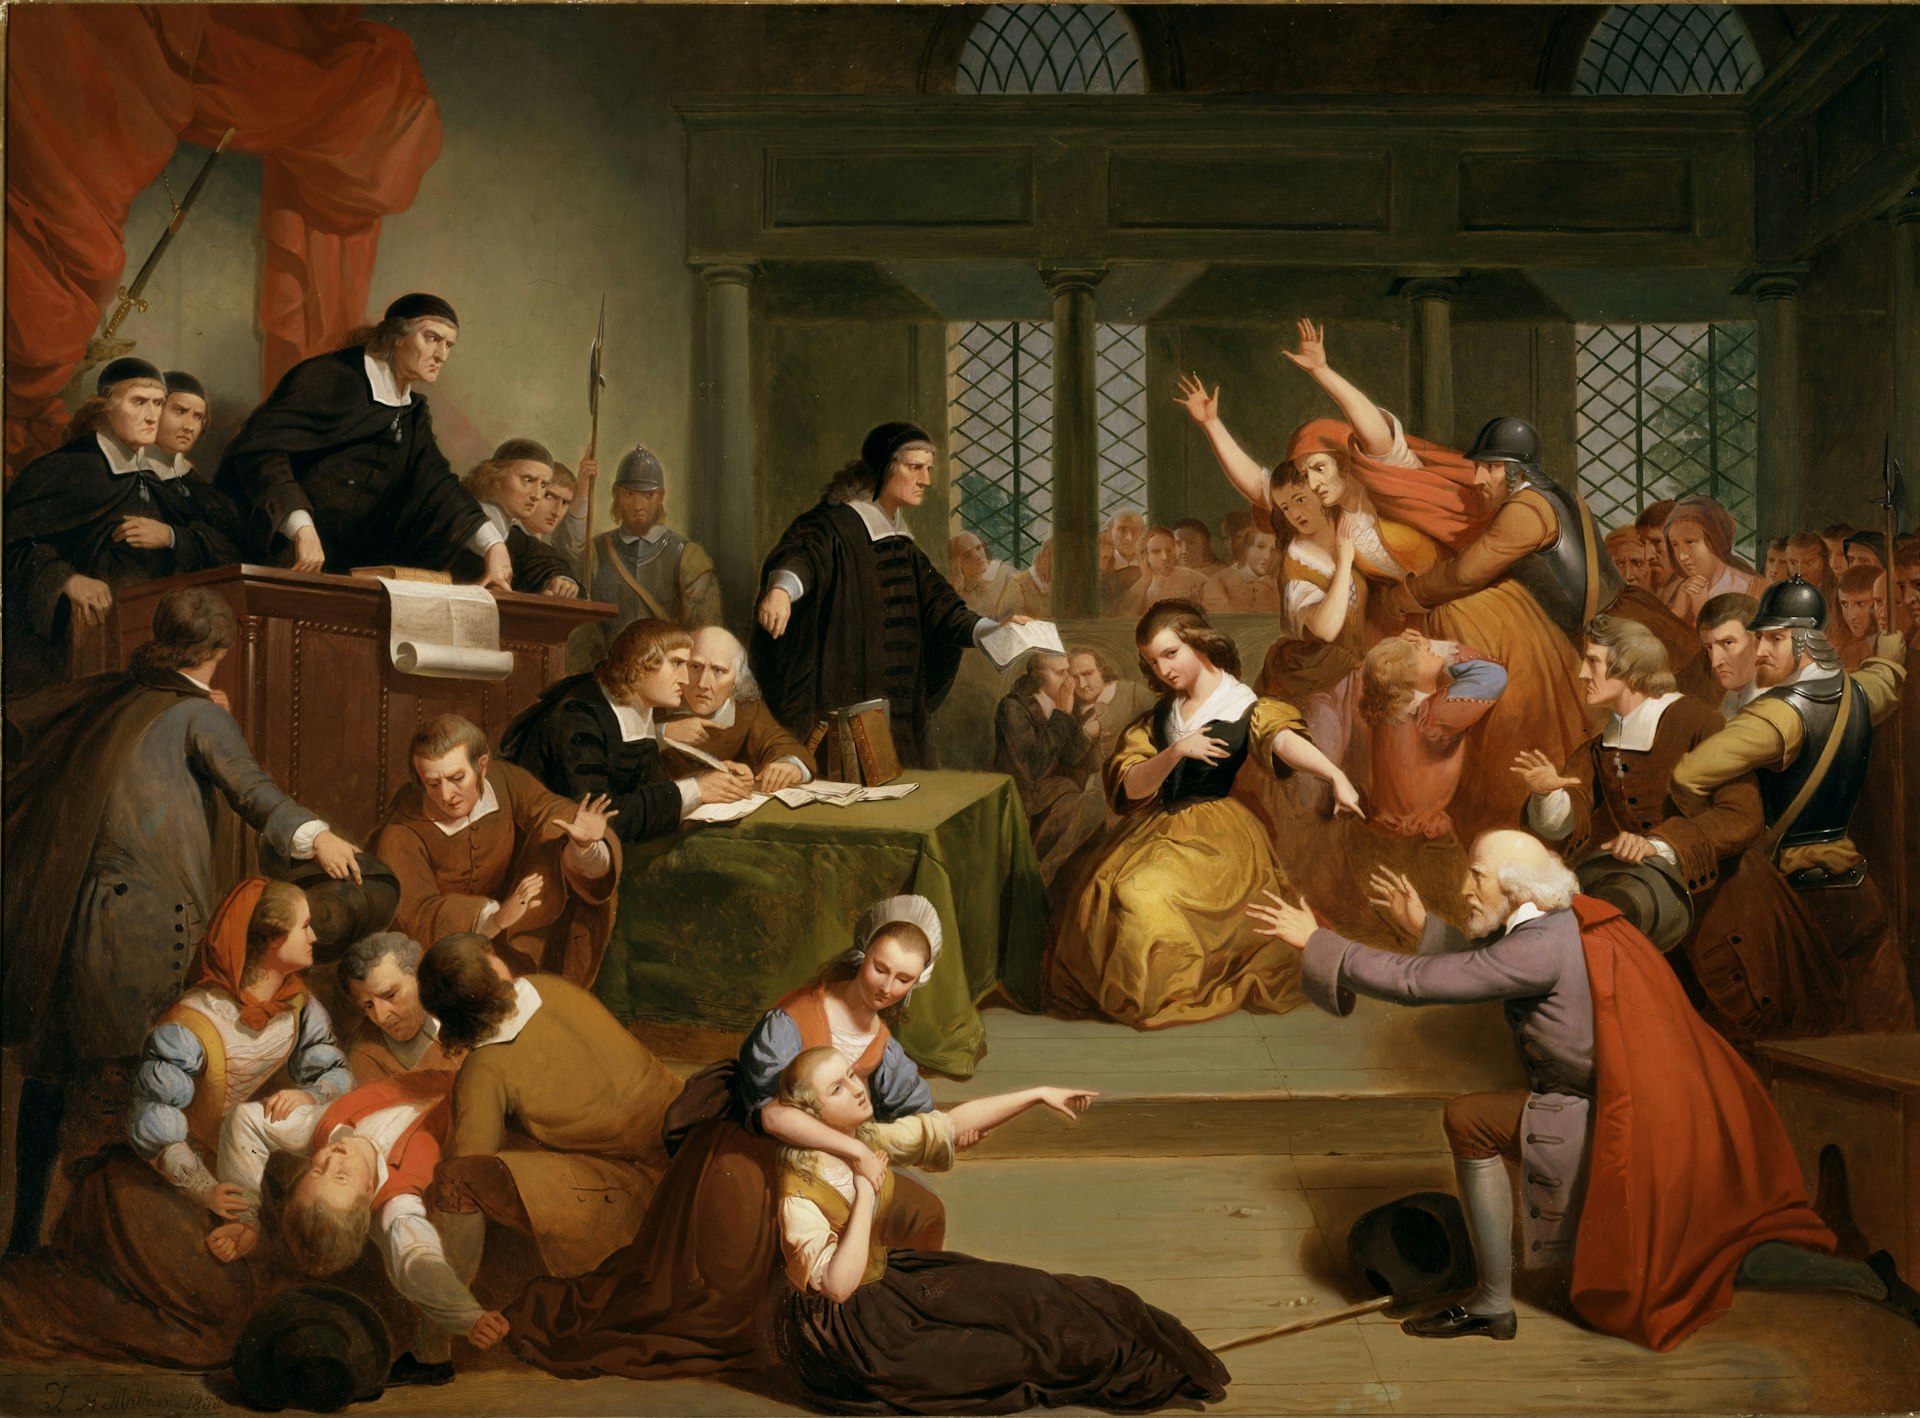 A painting depicting the Salem Witch Trials at the Peabody Essex Museum